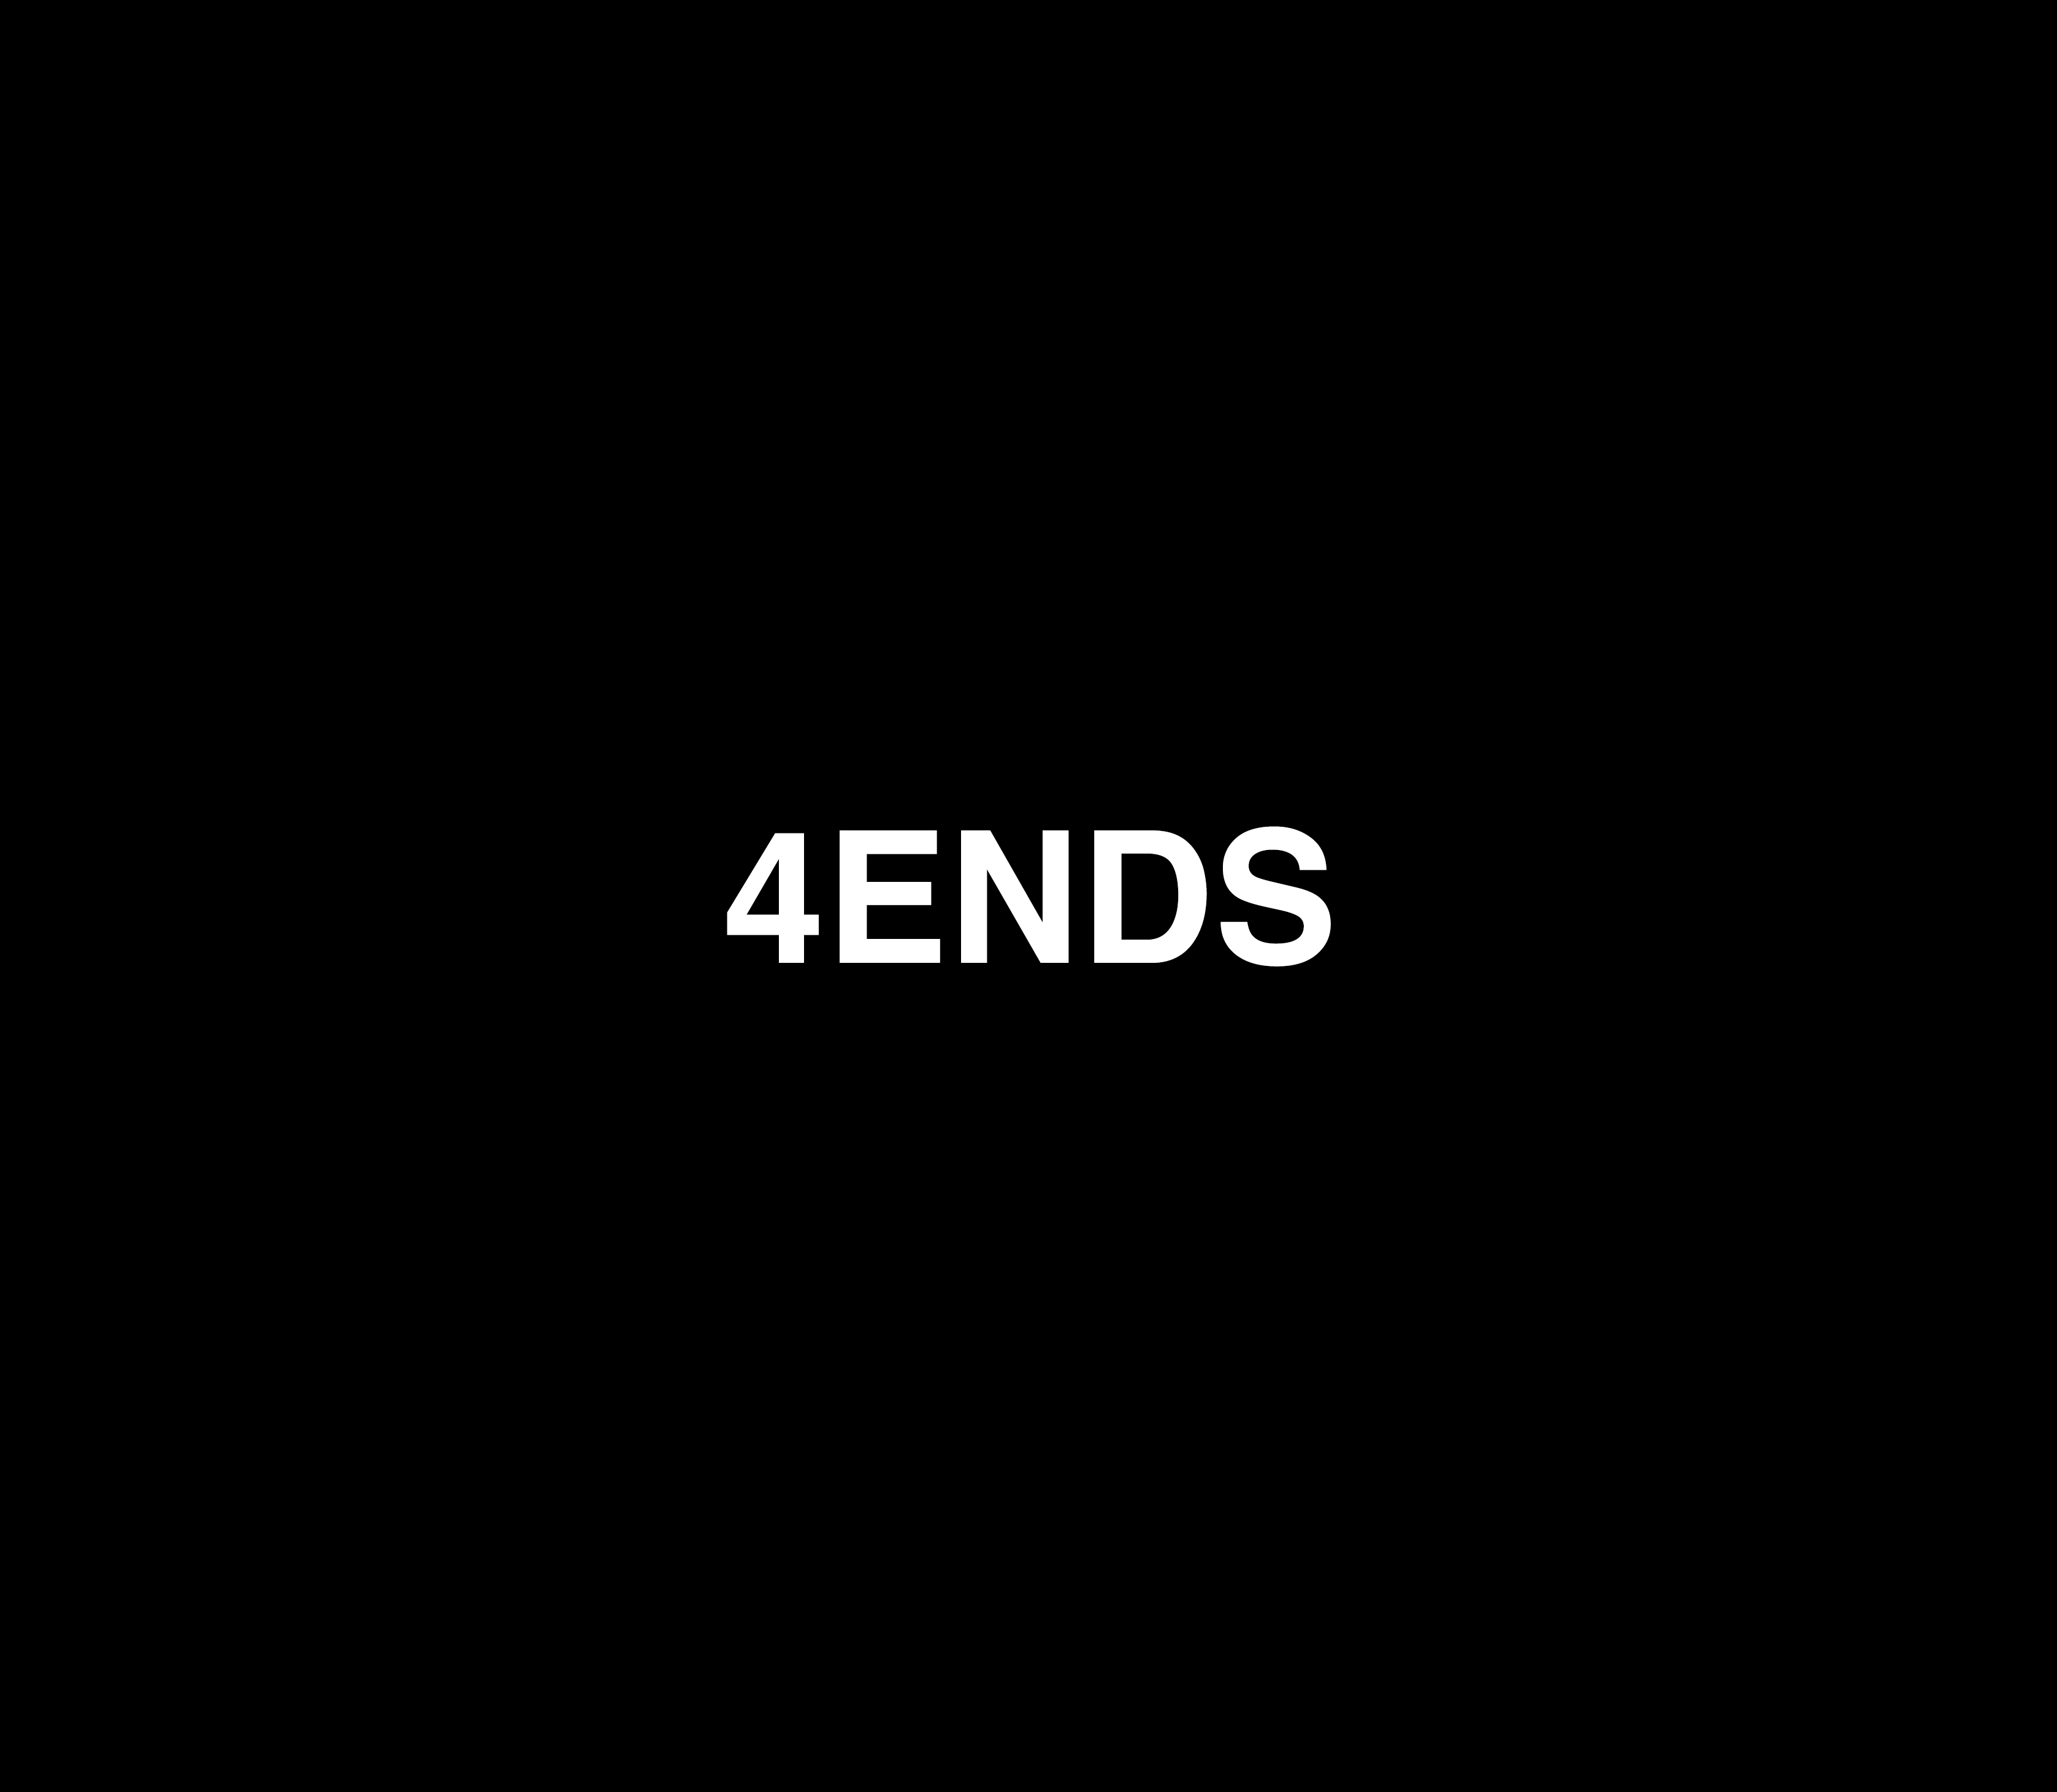 4ENDS